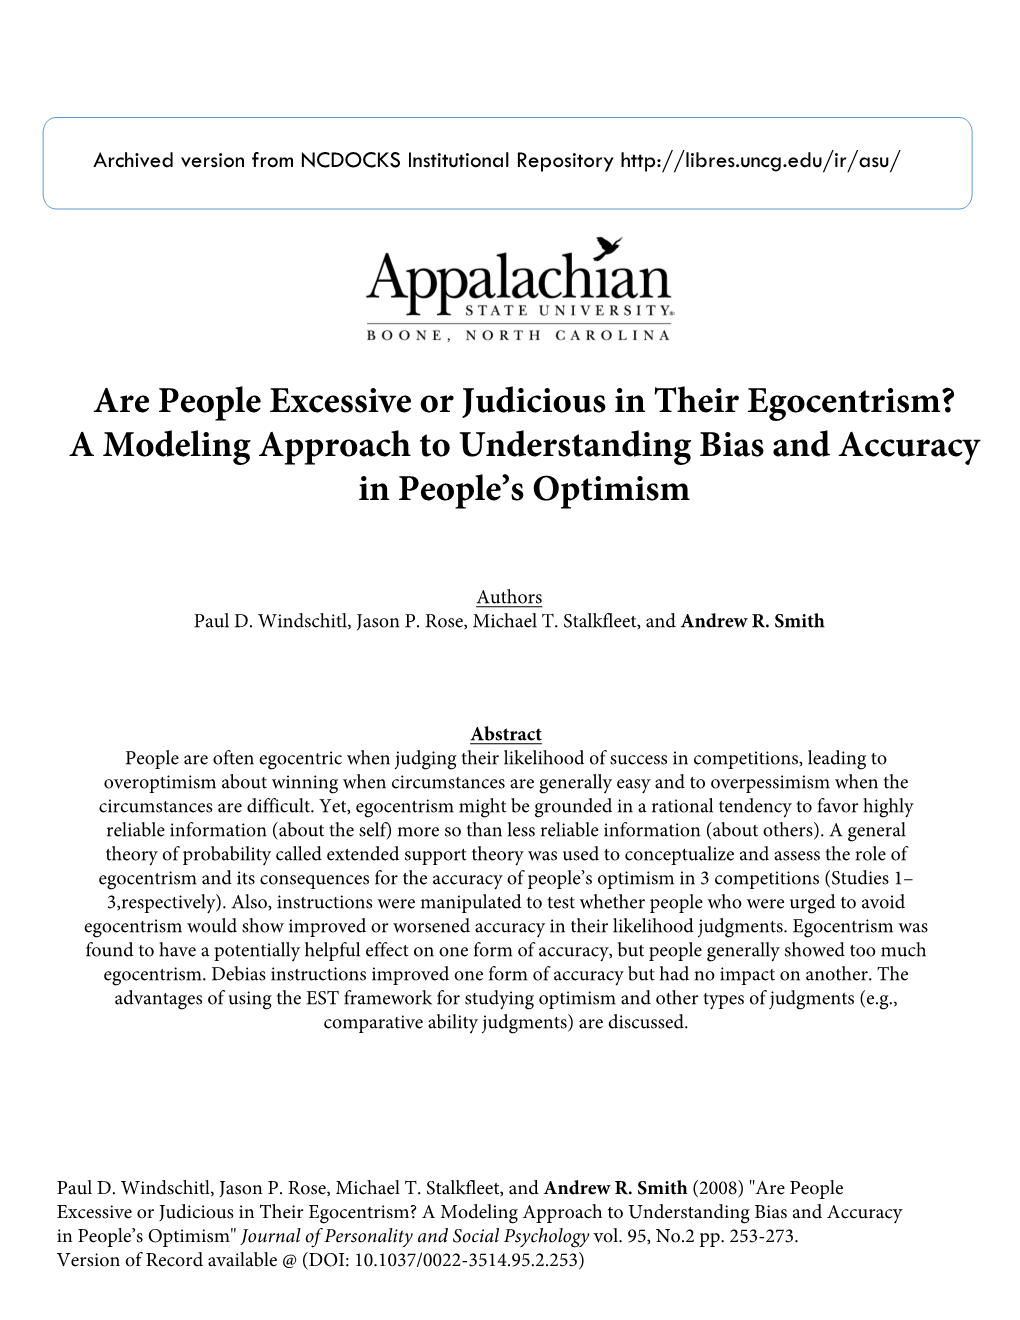 Are People Excessive Or Judicious in Their Egocentrism? a Modeling Approach to Understanding Bias and Accuracy in People’S Optimism